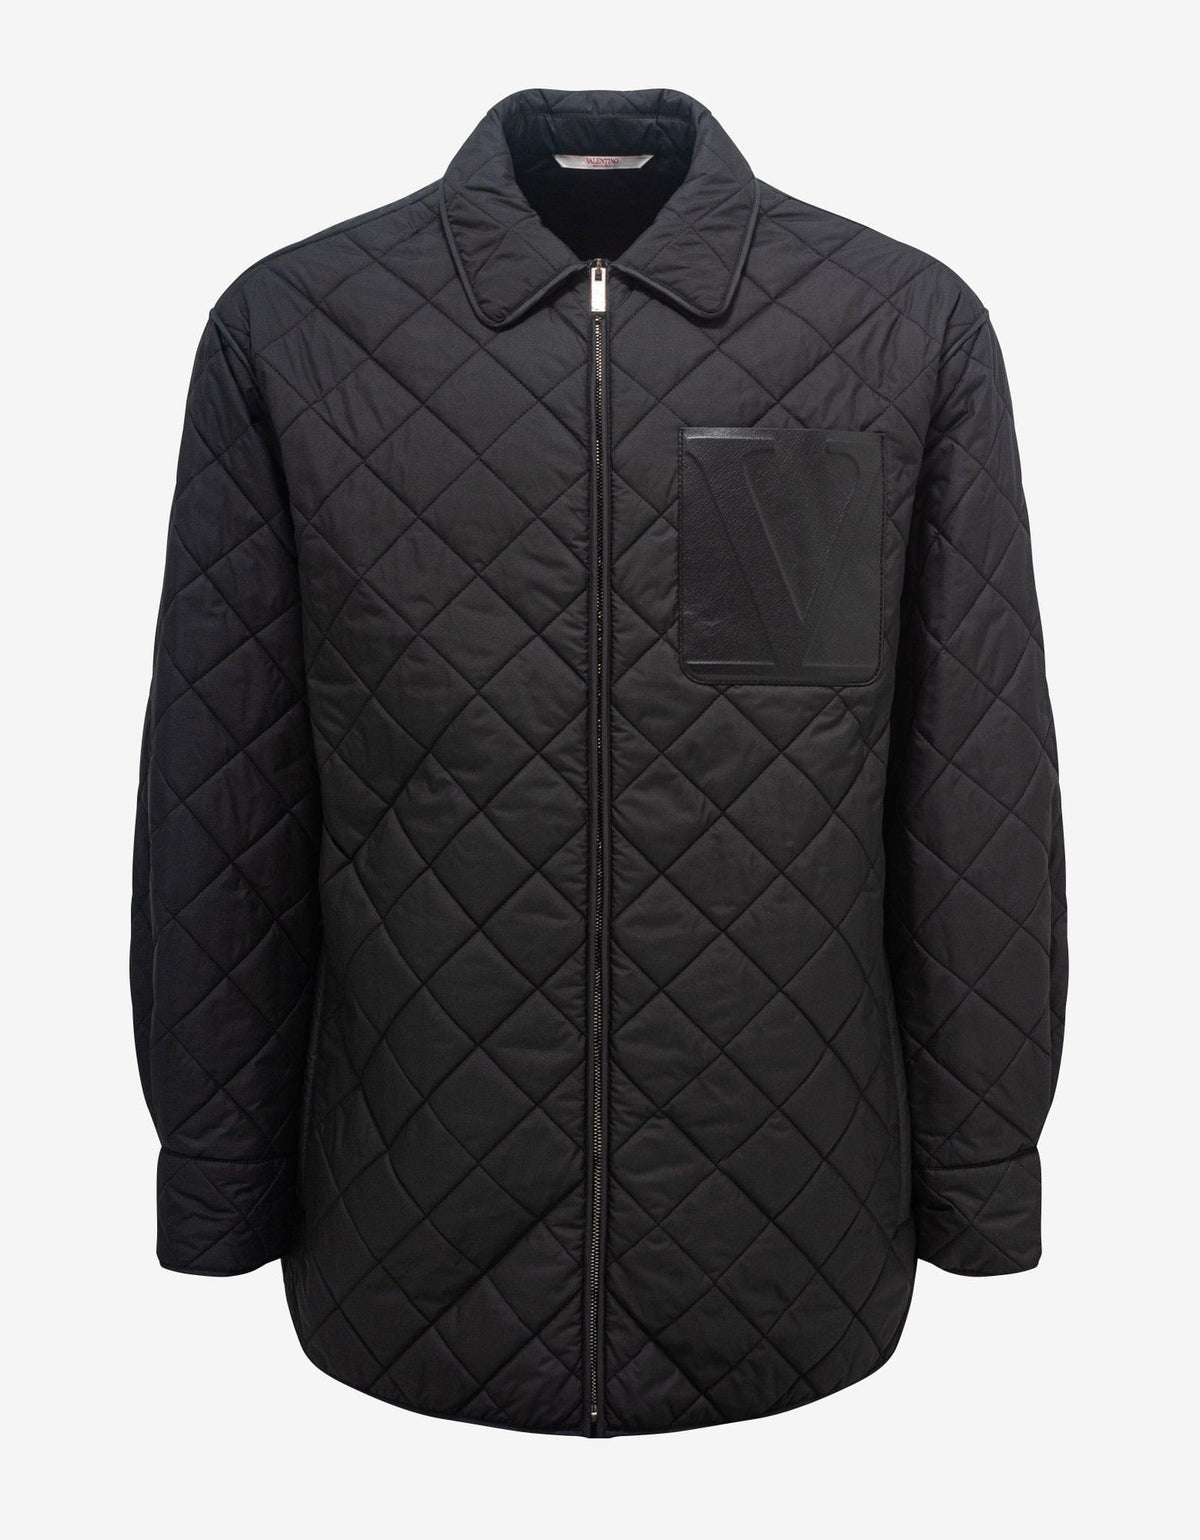 Valentino Black Quilted Jacket